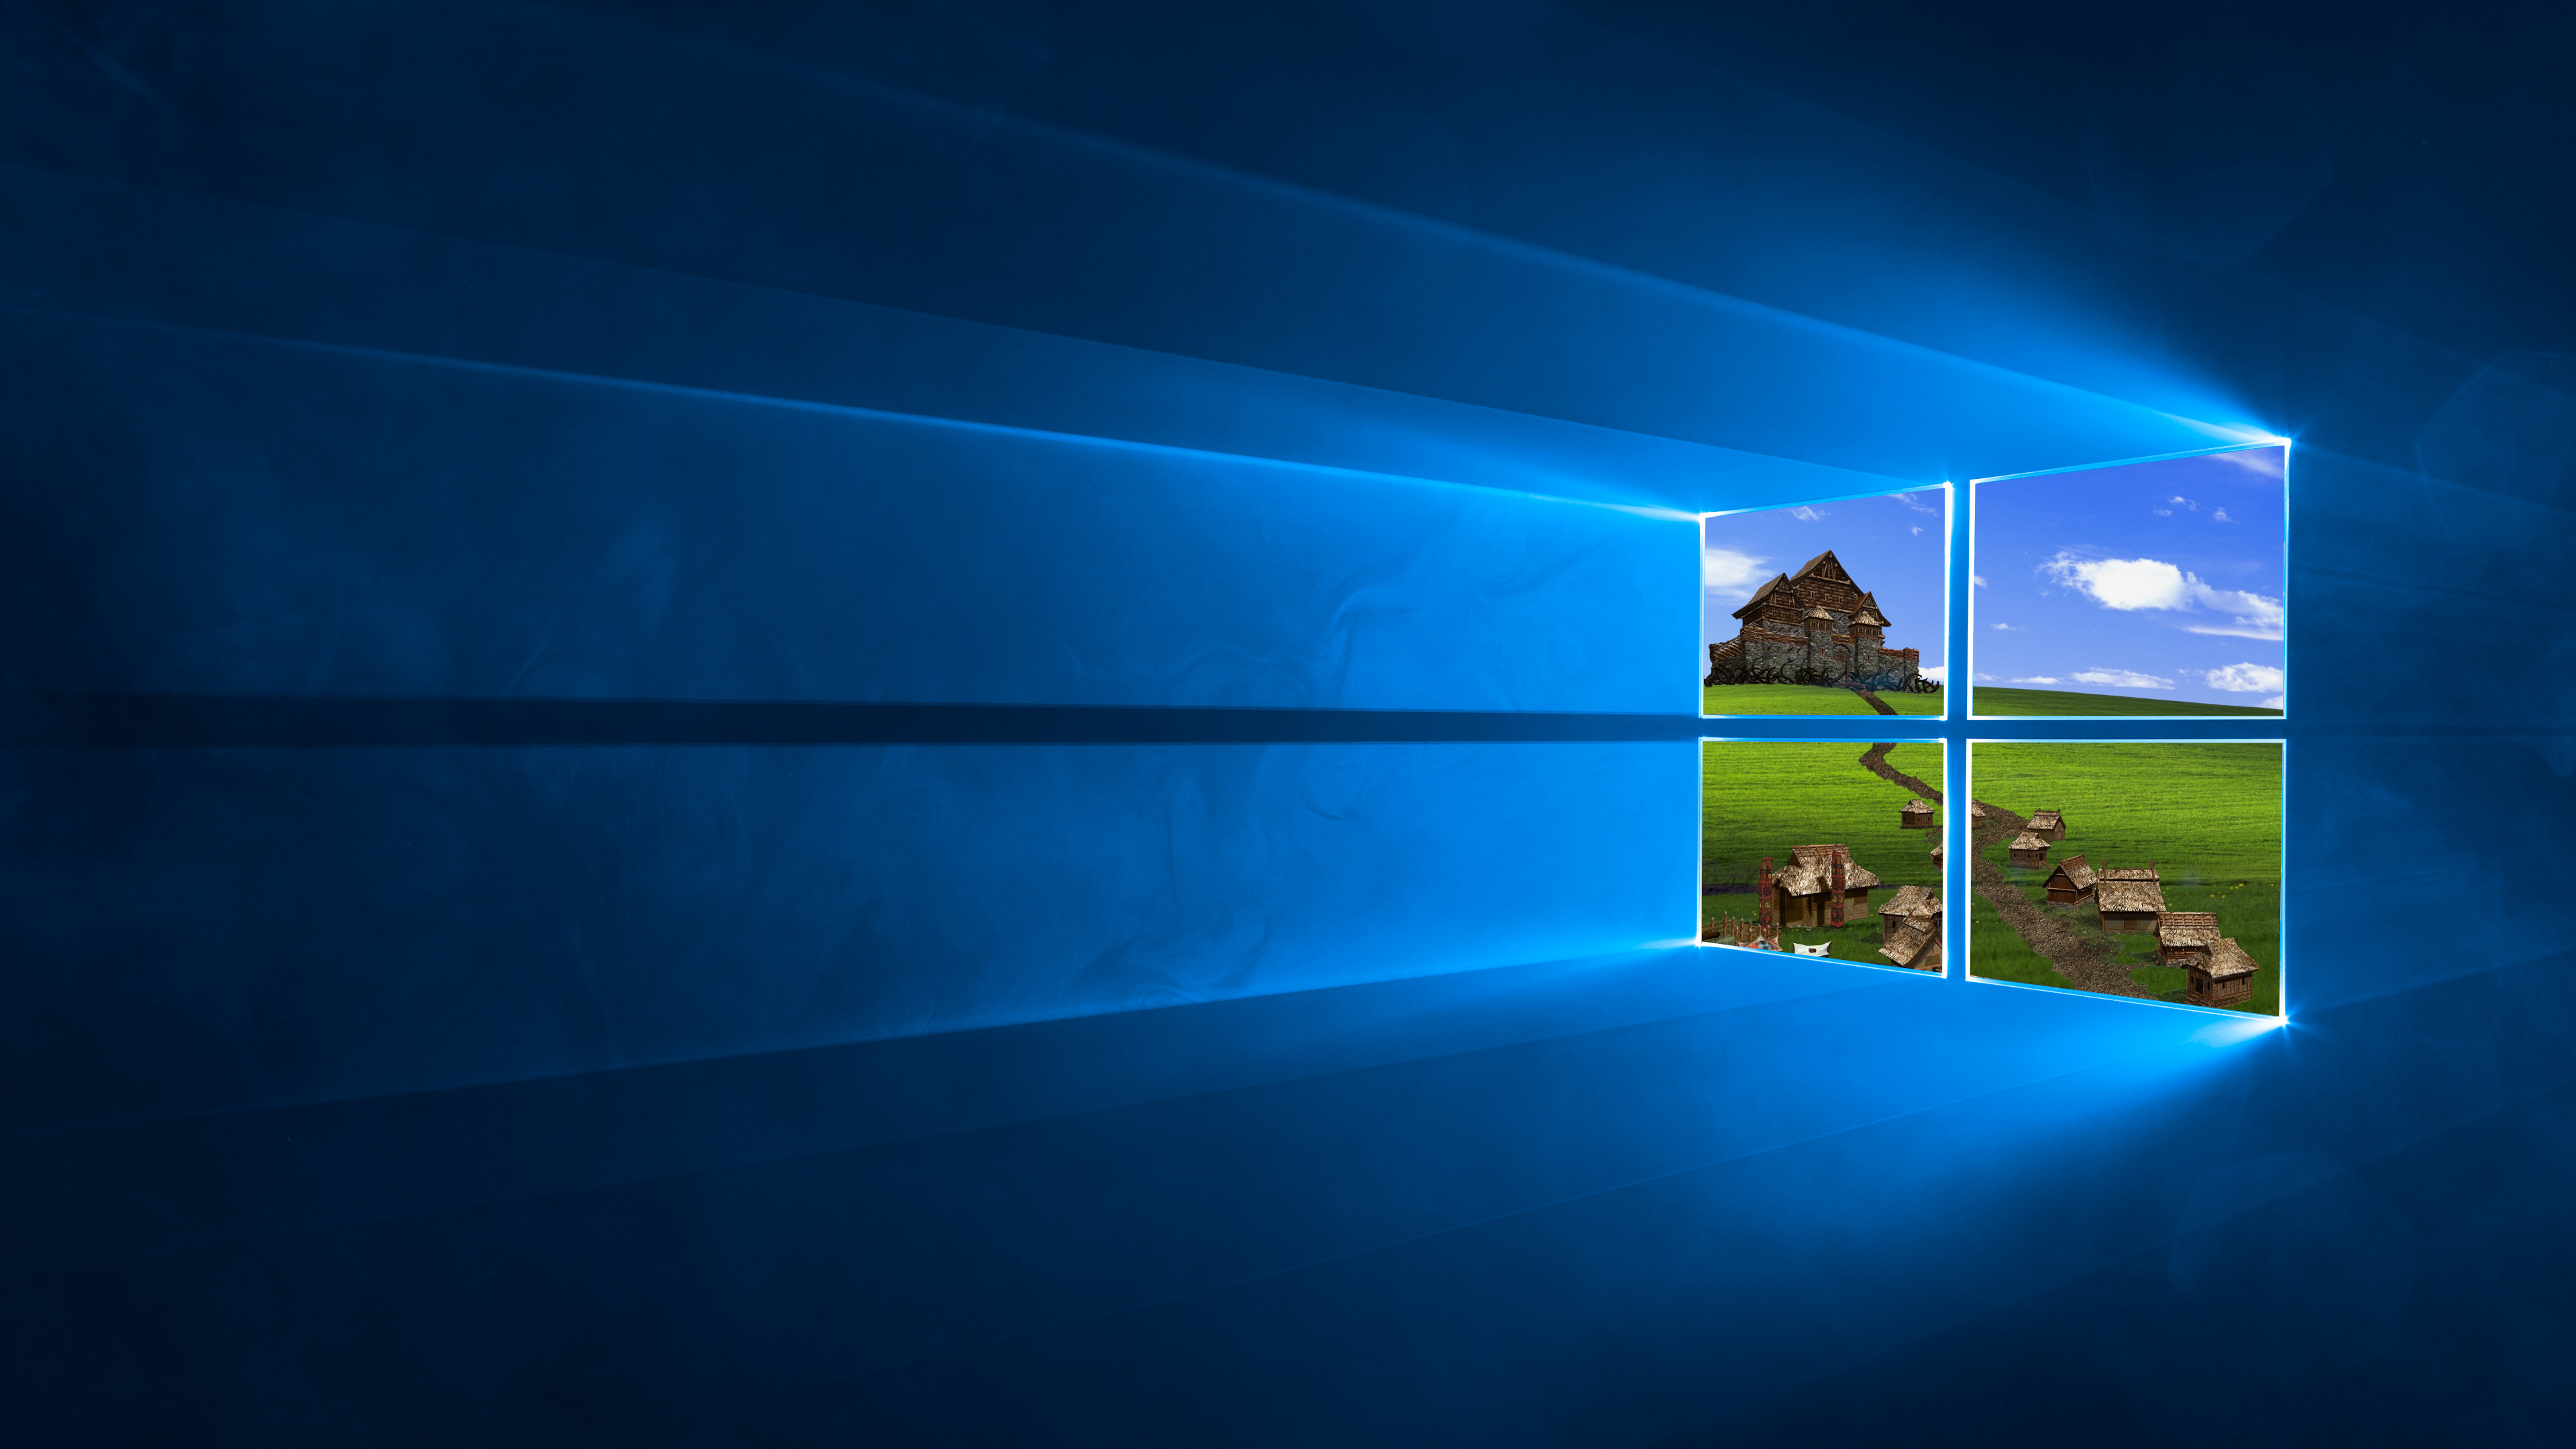 General 3840x2160 Windows 10 landscape Windows XP Heroes of Might and Magic Microsoft operating system